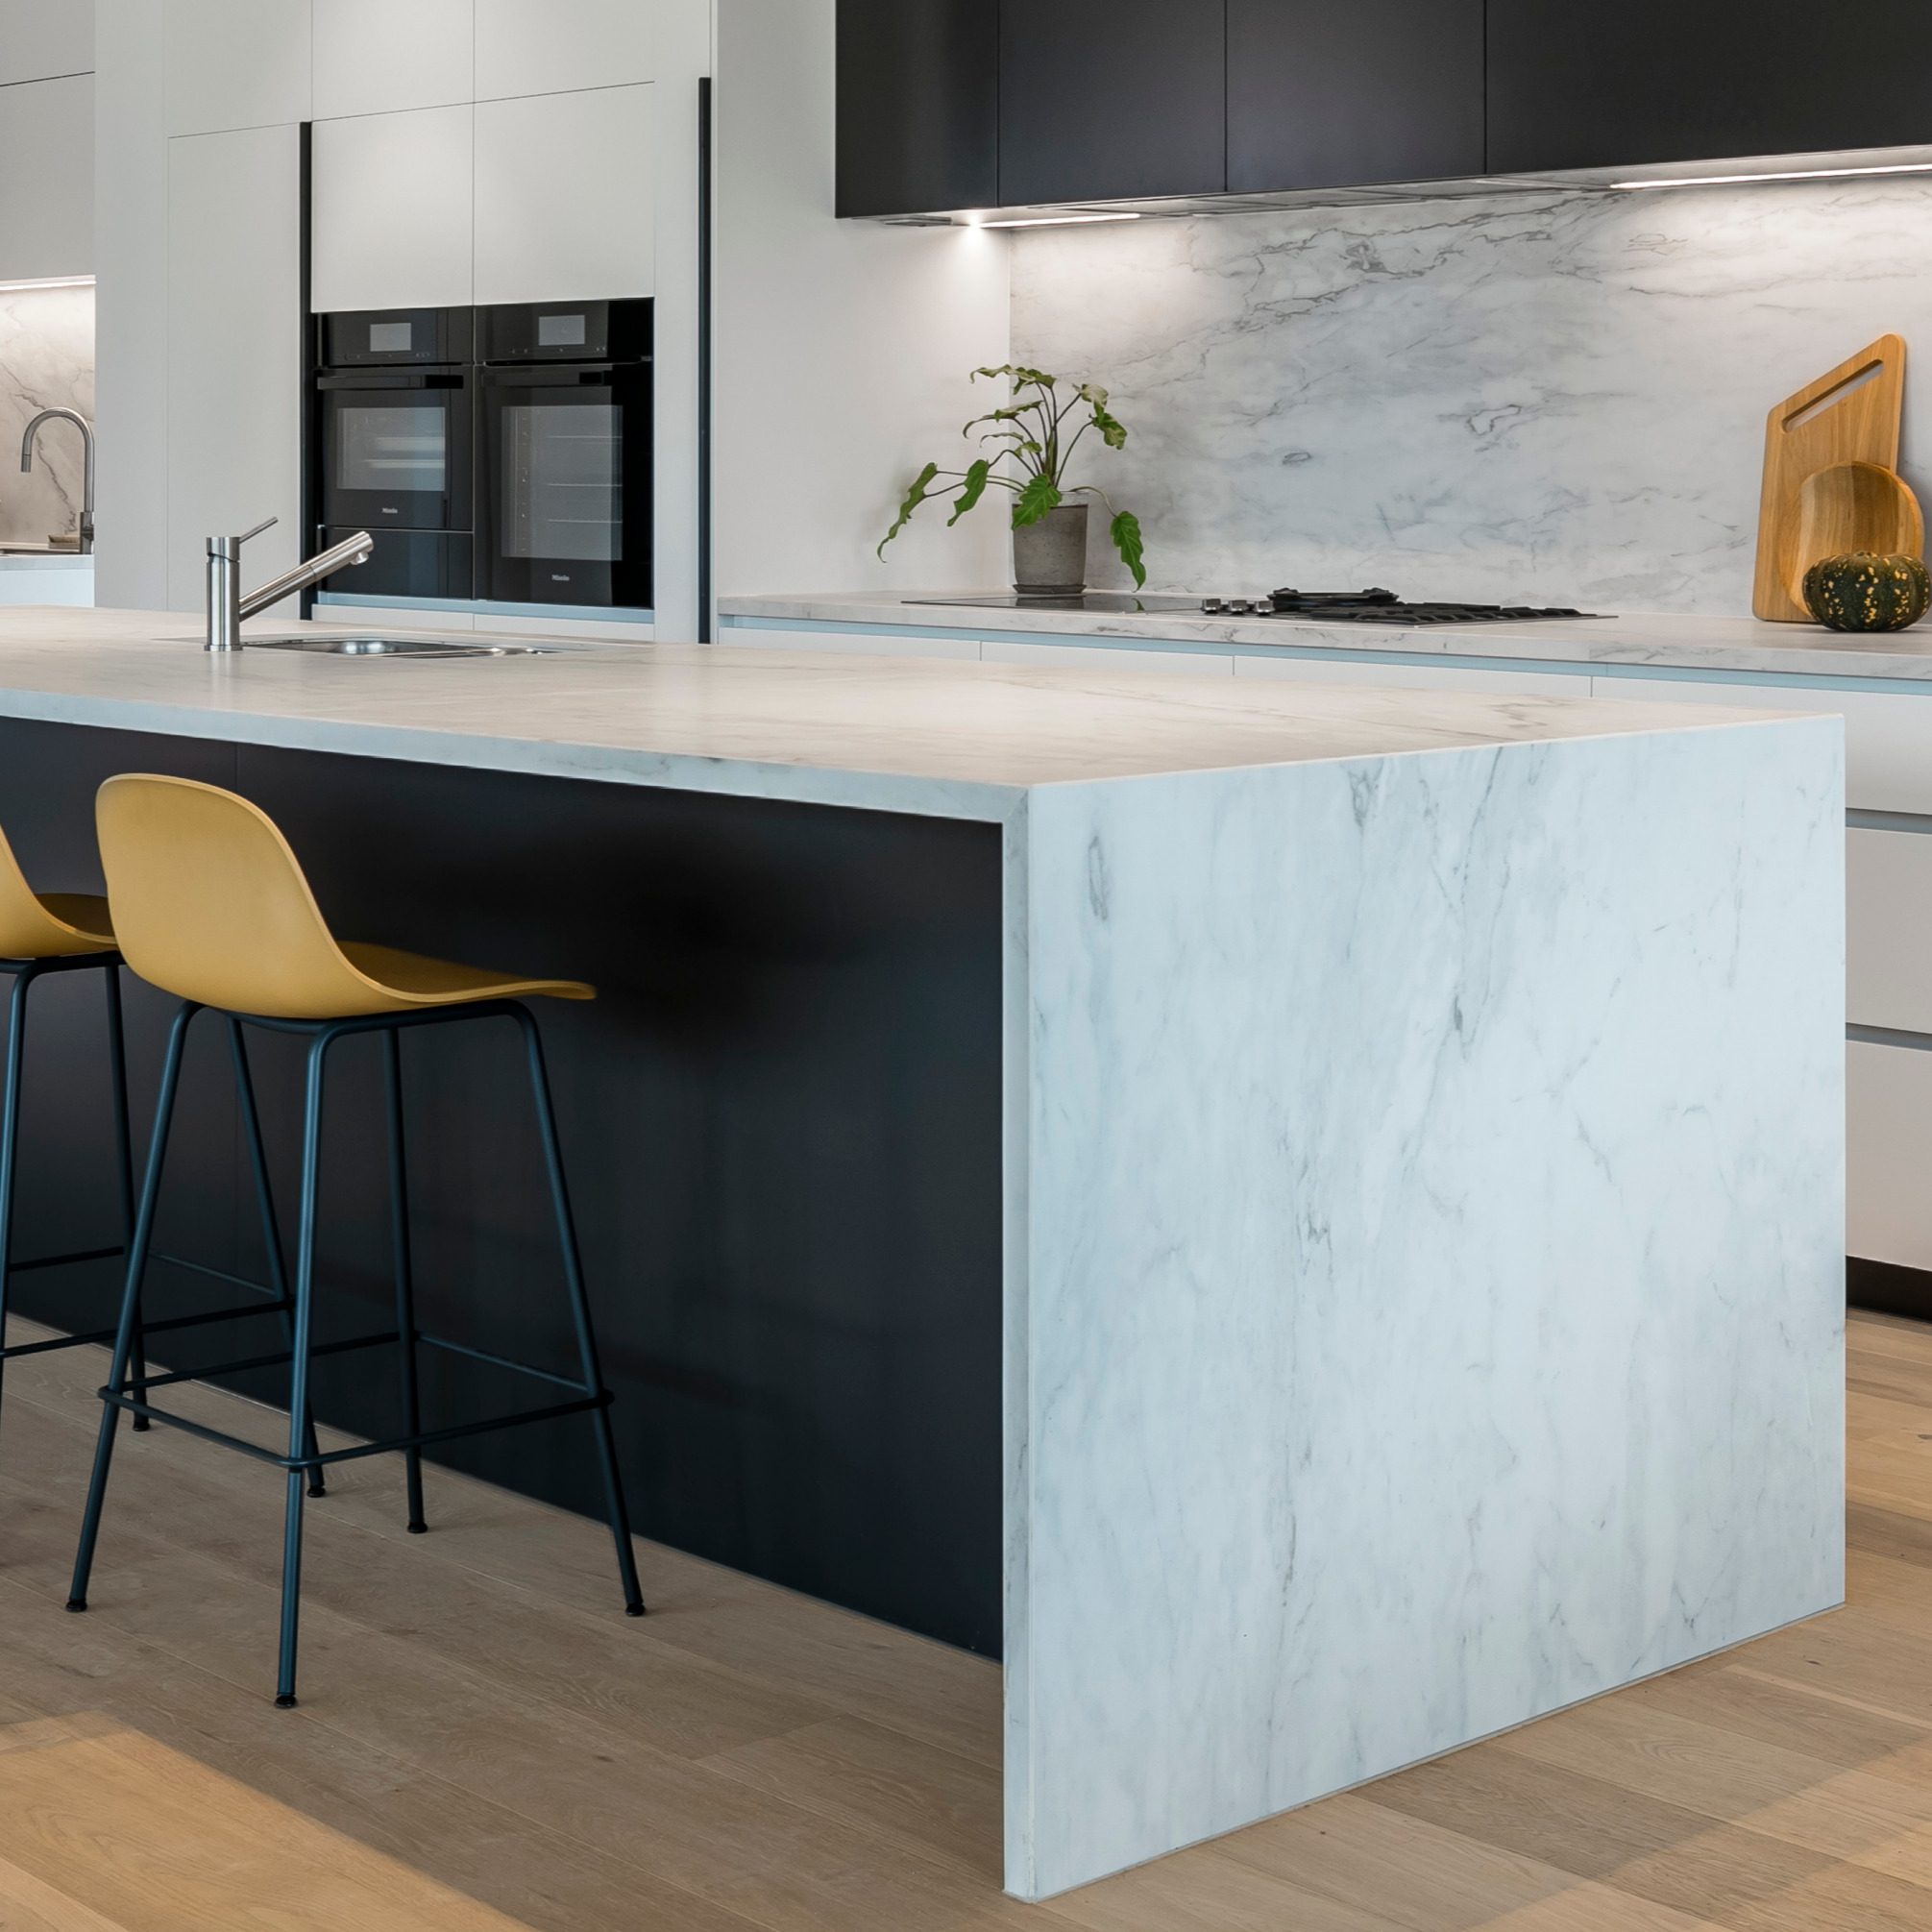 Modern kitchen interior featuring a sleek Dekton stone benchtop with a marble-like finish, complemented by black cabinets and wooden bar stools.